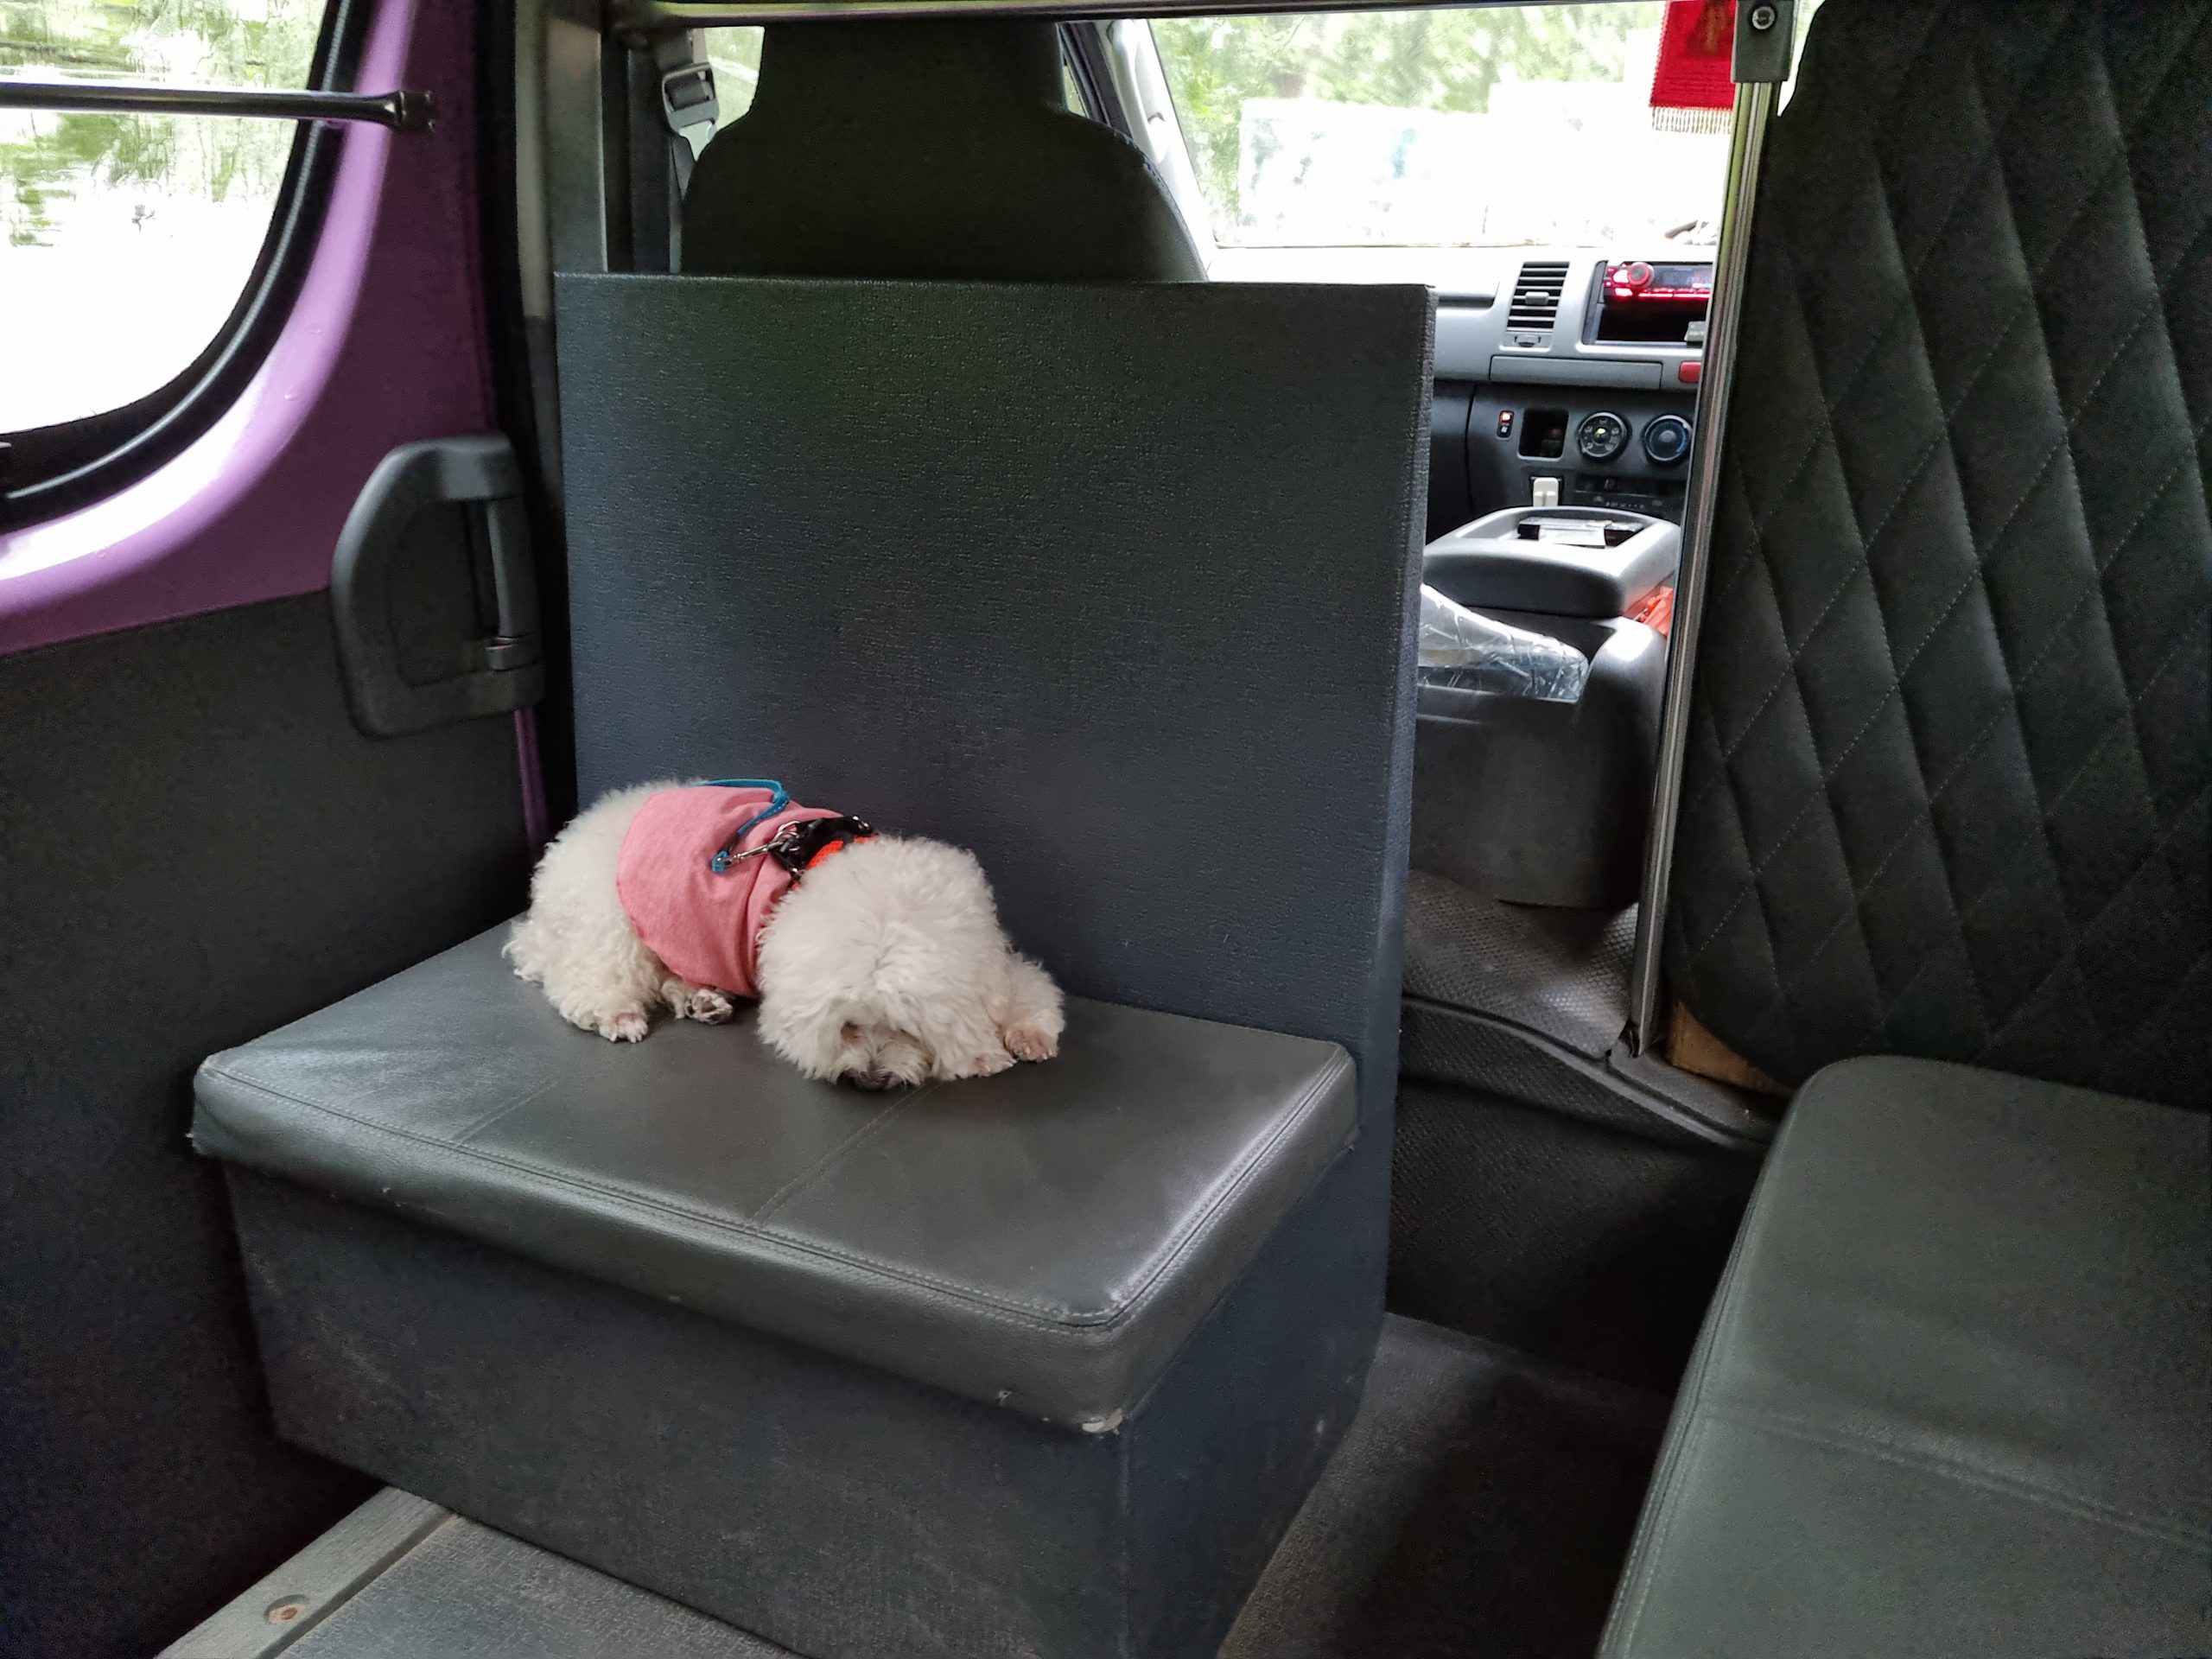 We brought our dog on a 2D1N Sailcation to Pulau Ubin! - Discover Sailing Asia - Alvinology